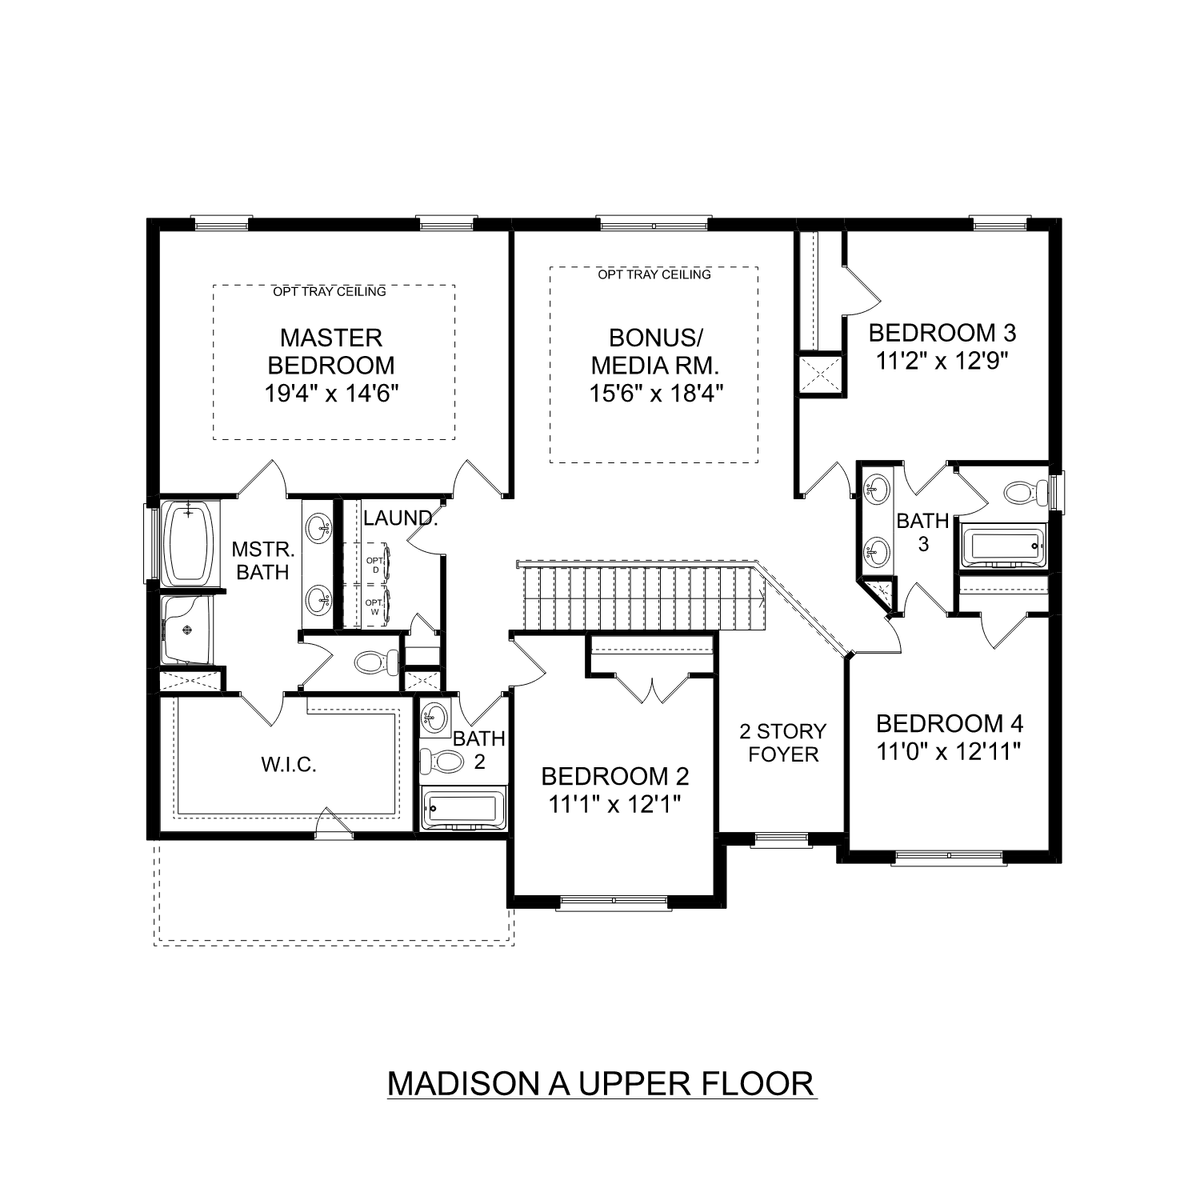 2 - The Madison A buildable floor plan layout in Davidson Homes' North Ridge community.